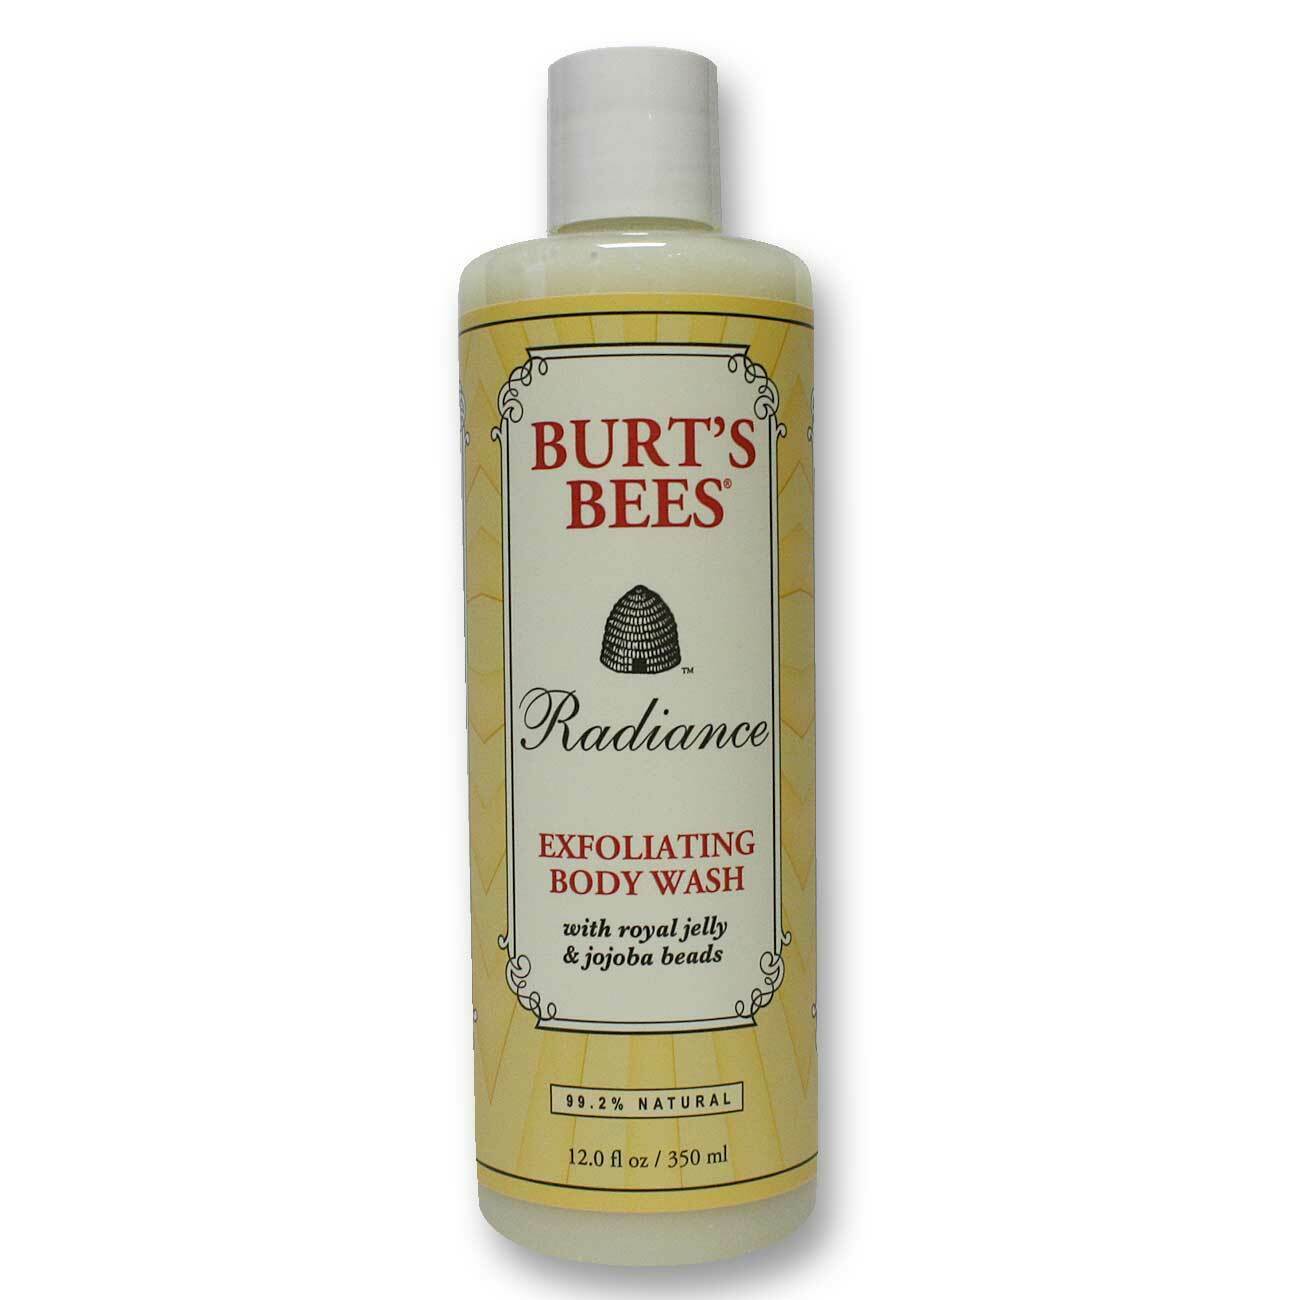 Burt's Bees Radiance Exfoliating Body Wash - Rare and Discontinued Item!